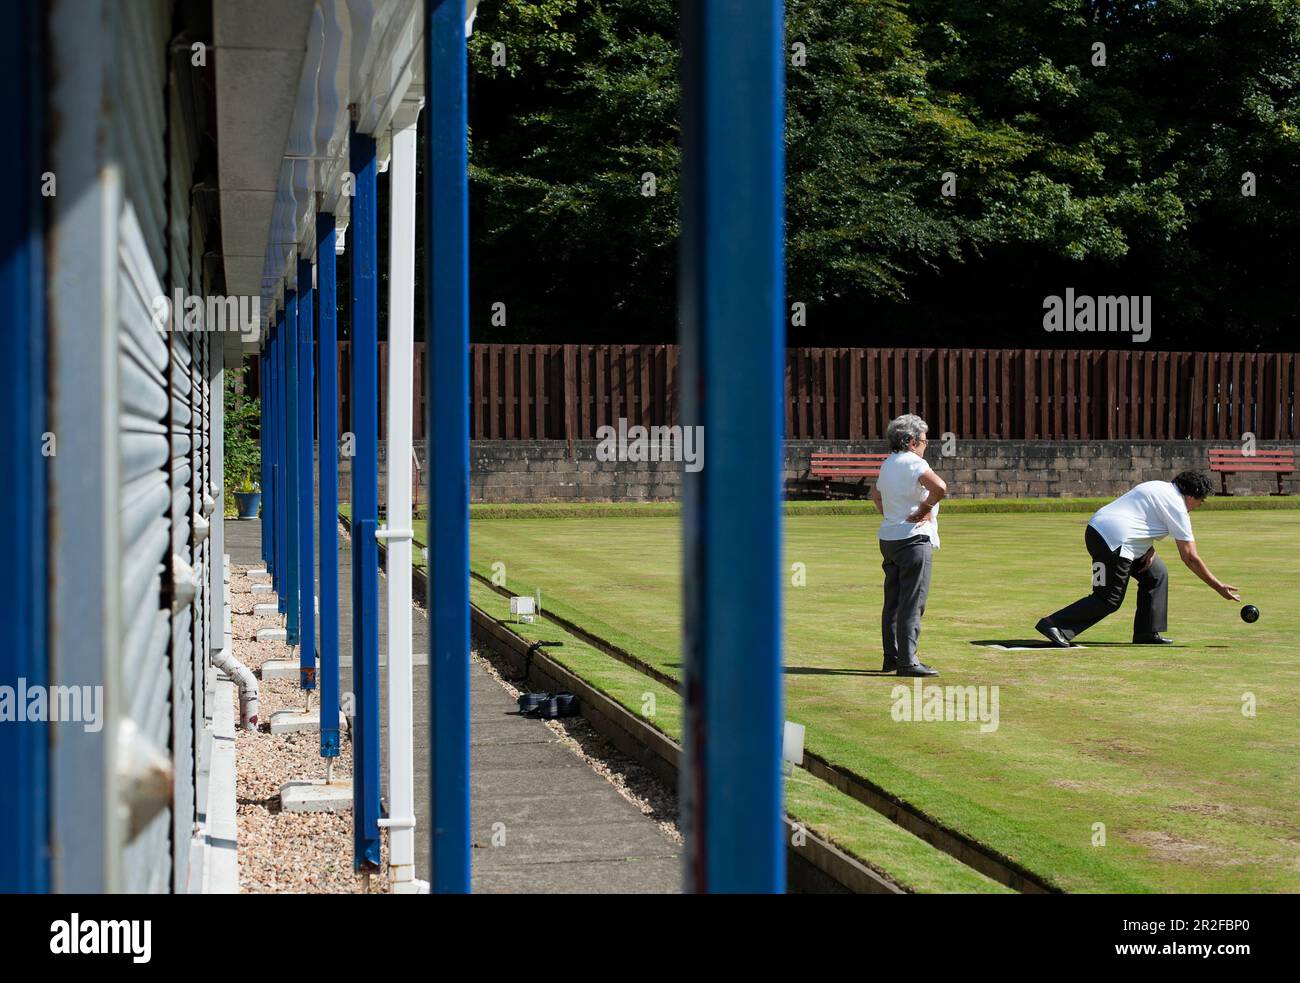 Two women play bowls beside the blue and white metal columns of the pavilion at the Kilmarnock lawn bowling green in Kilmarnock, Ayrshire, Scotland UK Stock Photo